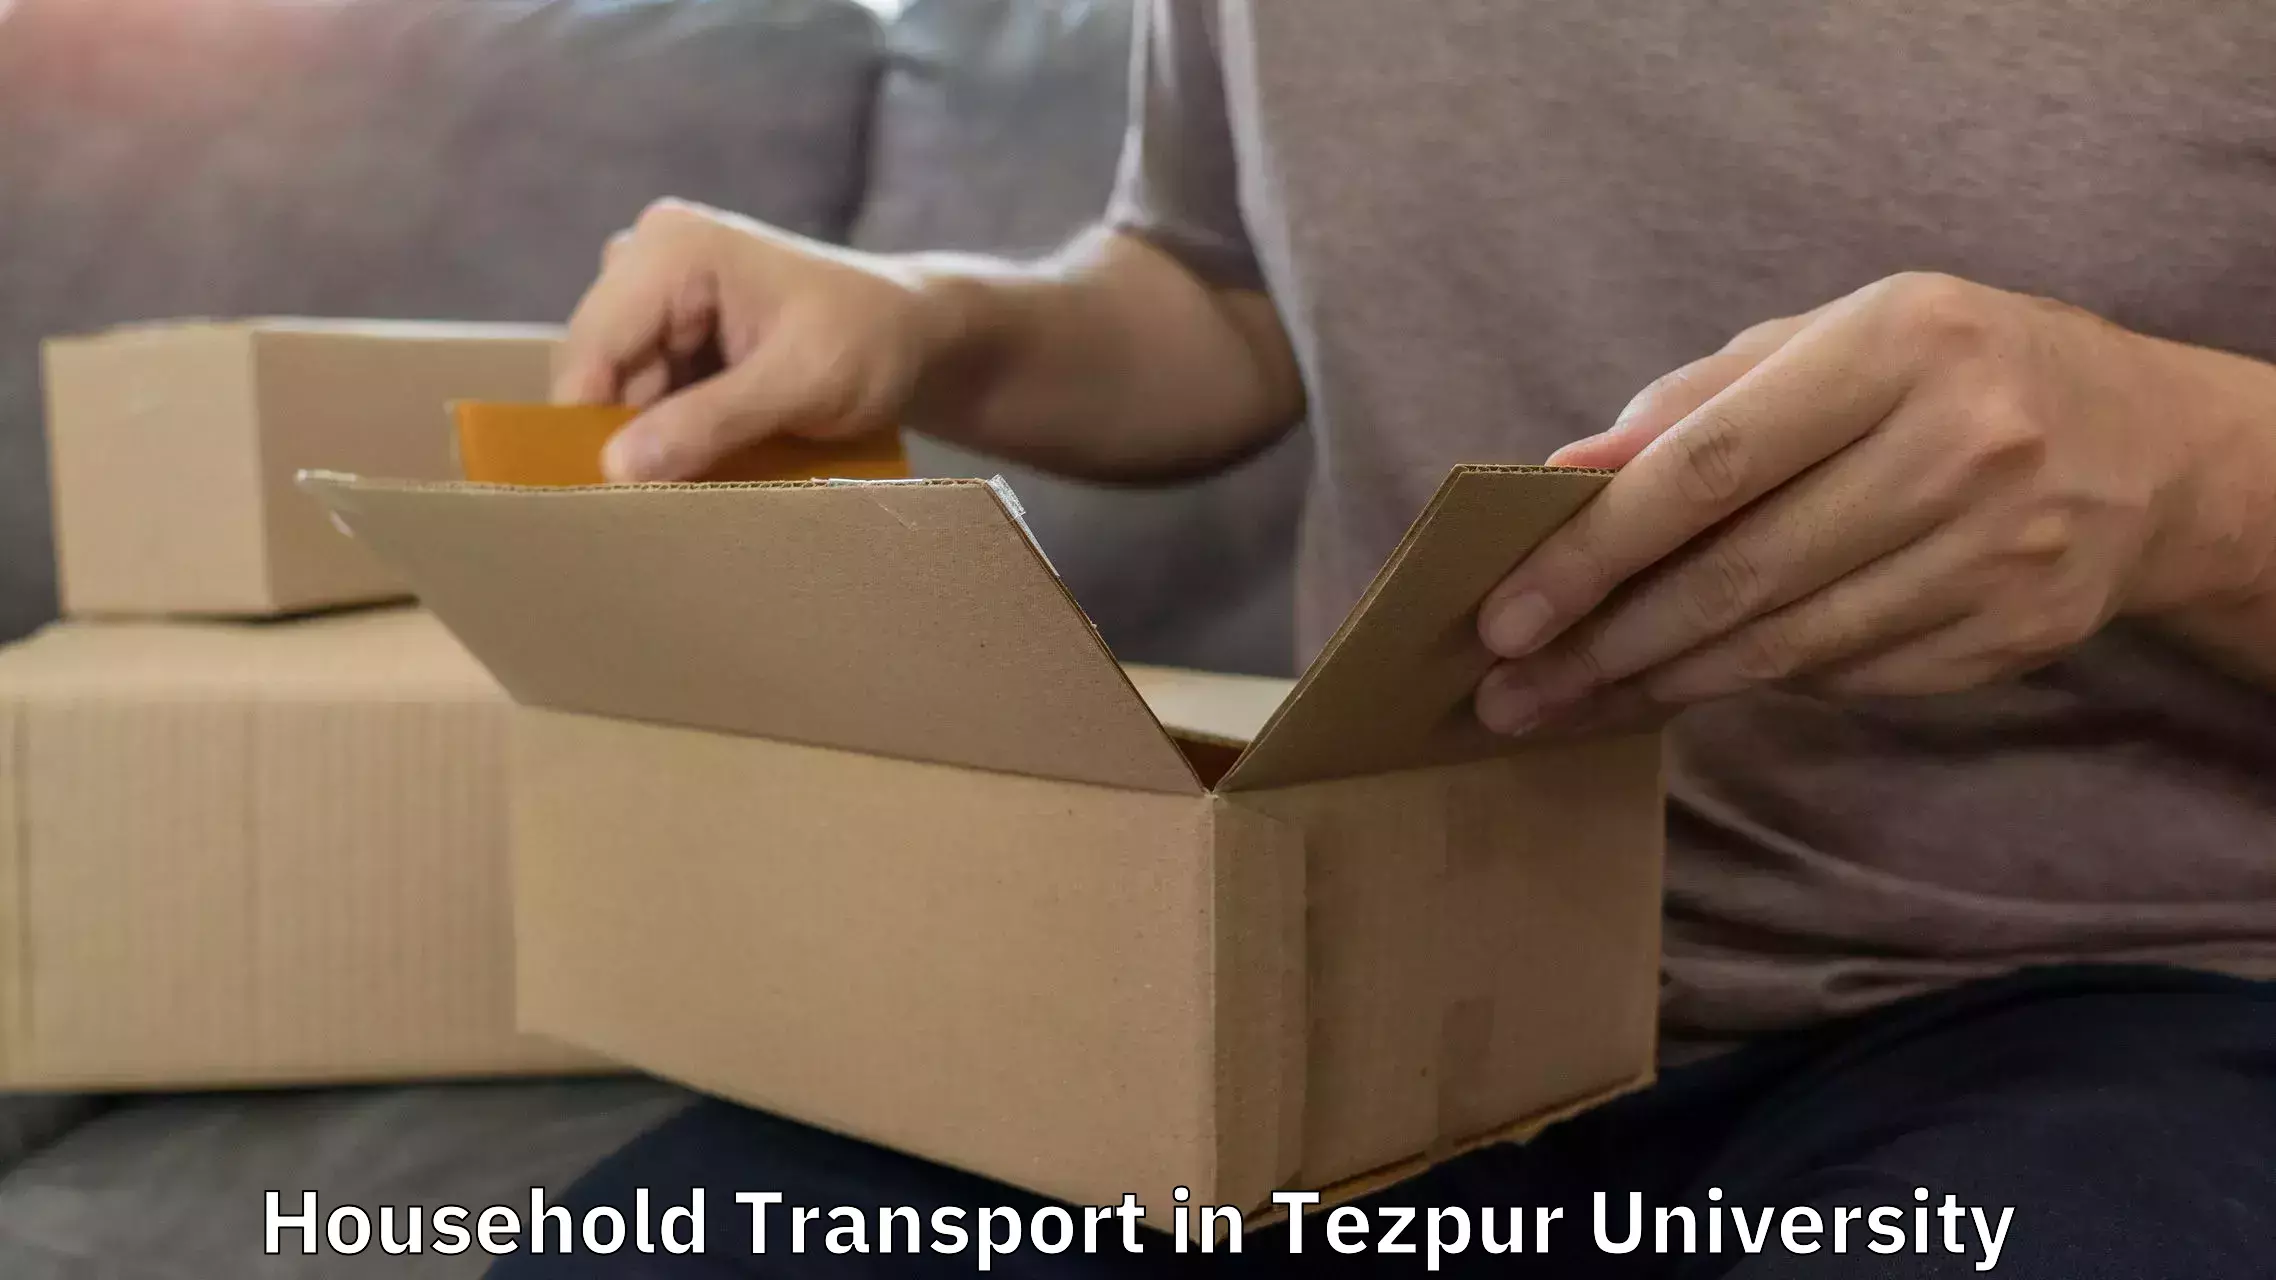 Professional moving assistance in Tezpur University